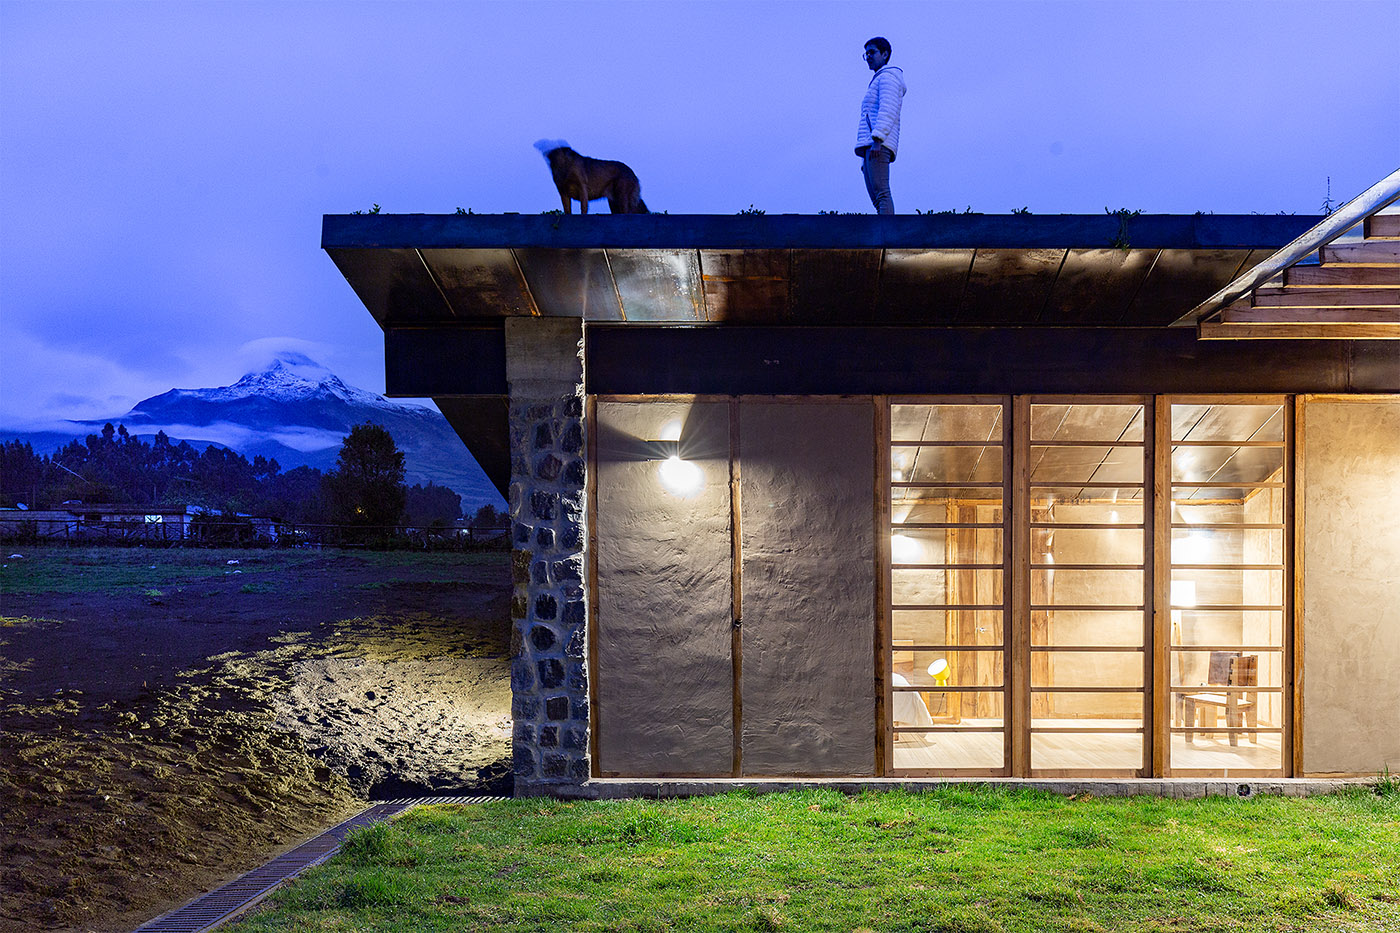 Casa Patios: an architecture made of soil and eucalyptus within and under the ecuadorian countryside